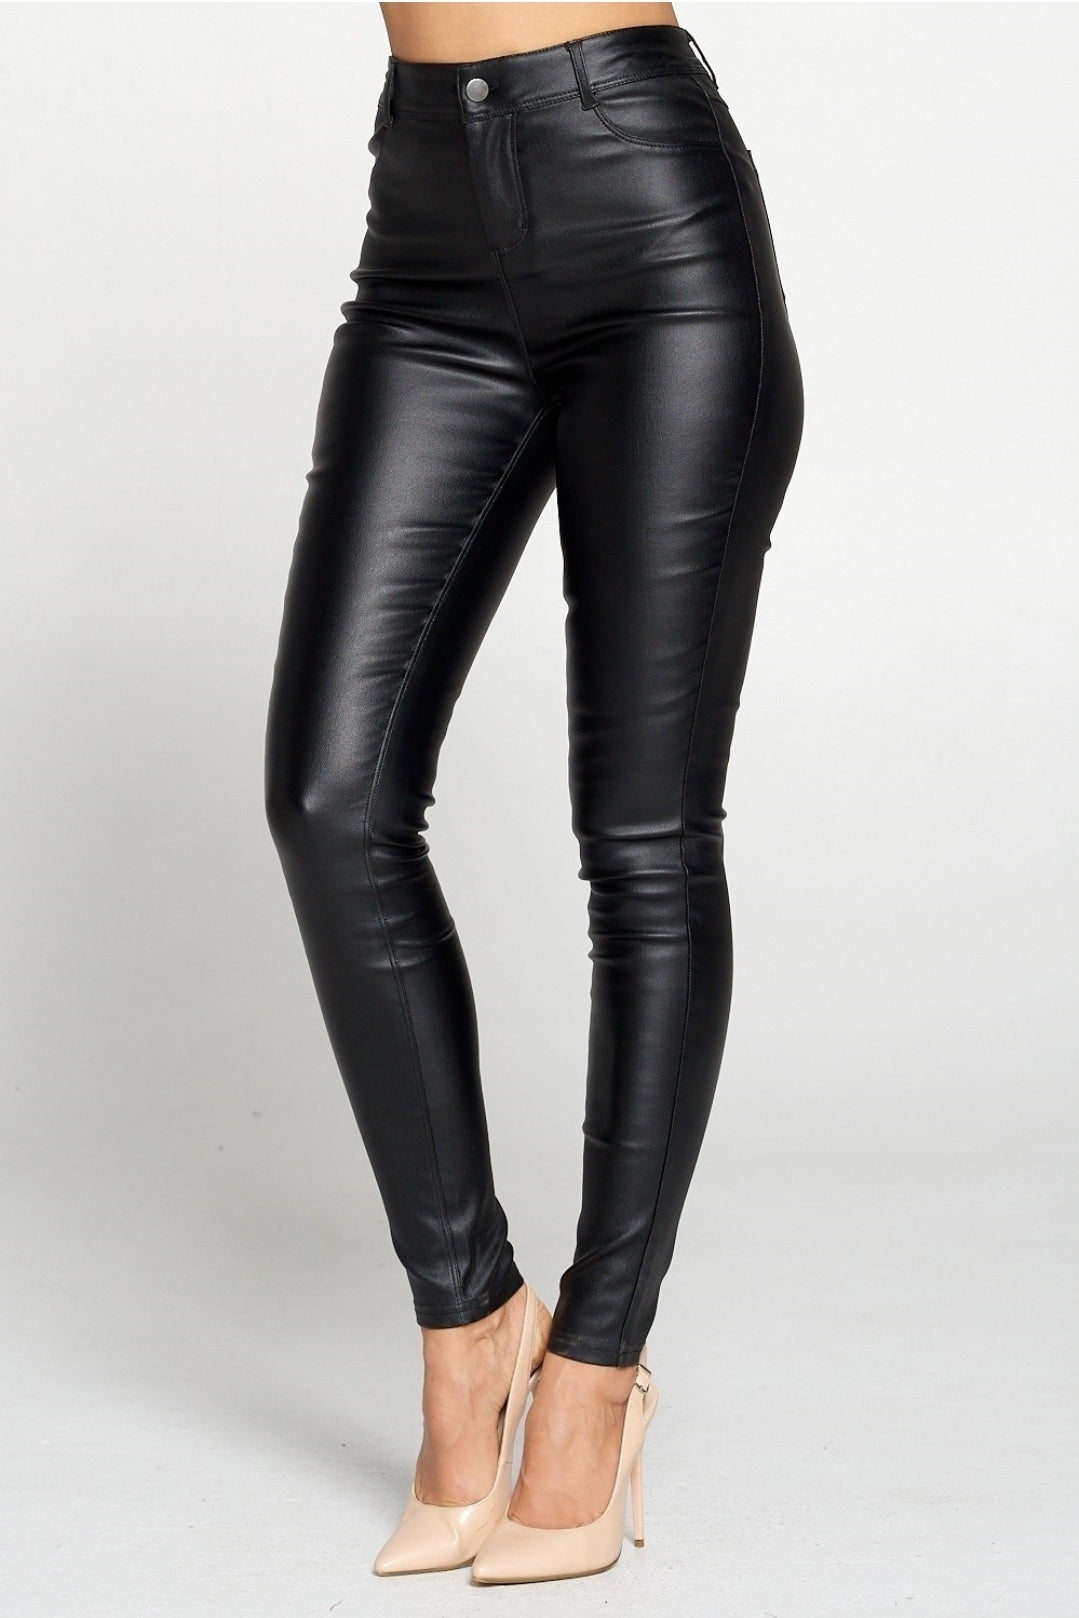 Black Leather Pants Jeans - High Waisted (Stretchy)